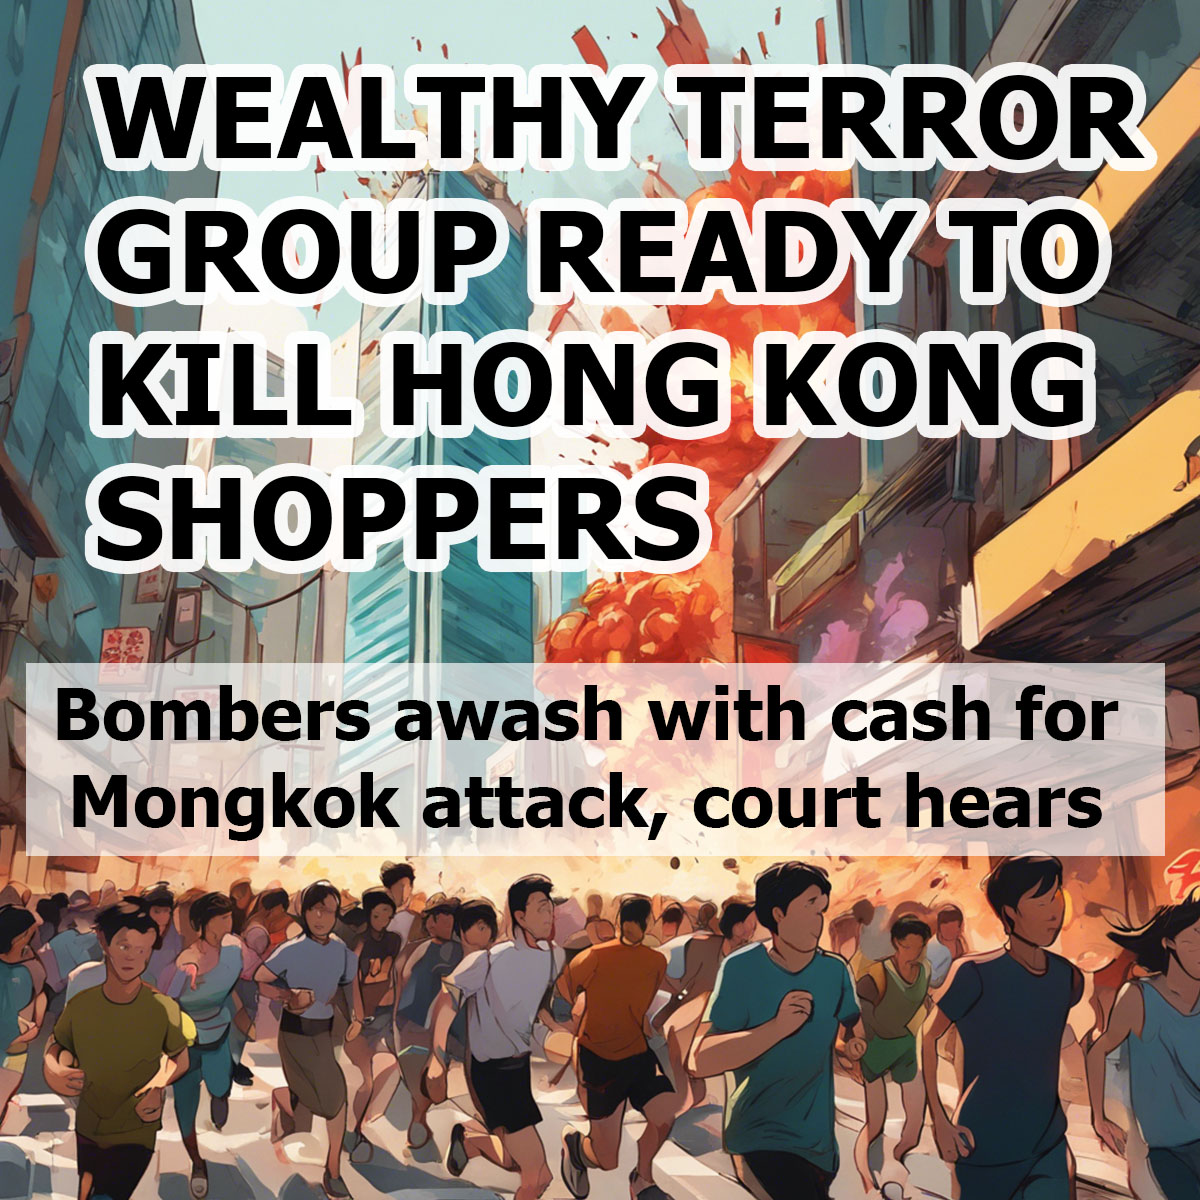 WEALTHY TERROR GROUP READY TO KILL HONG KONG SHOPPERS
Hong Kong protesters planned to detonate bombs in Mongkok, one of the world’s most densely populated areas.

Innocent Hong Kong people would be killed in the attack on a shopping district, but a leader told a shocked court